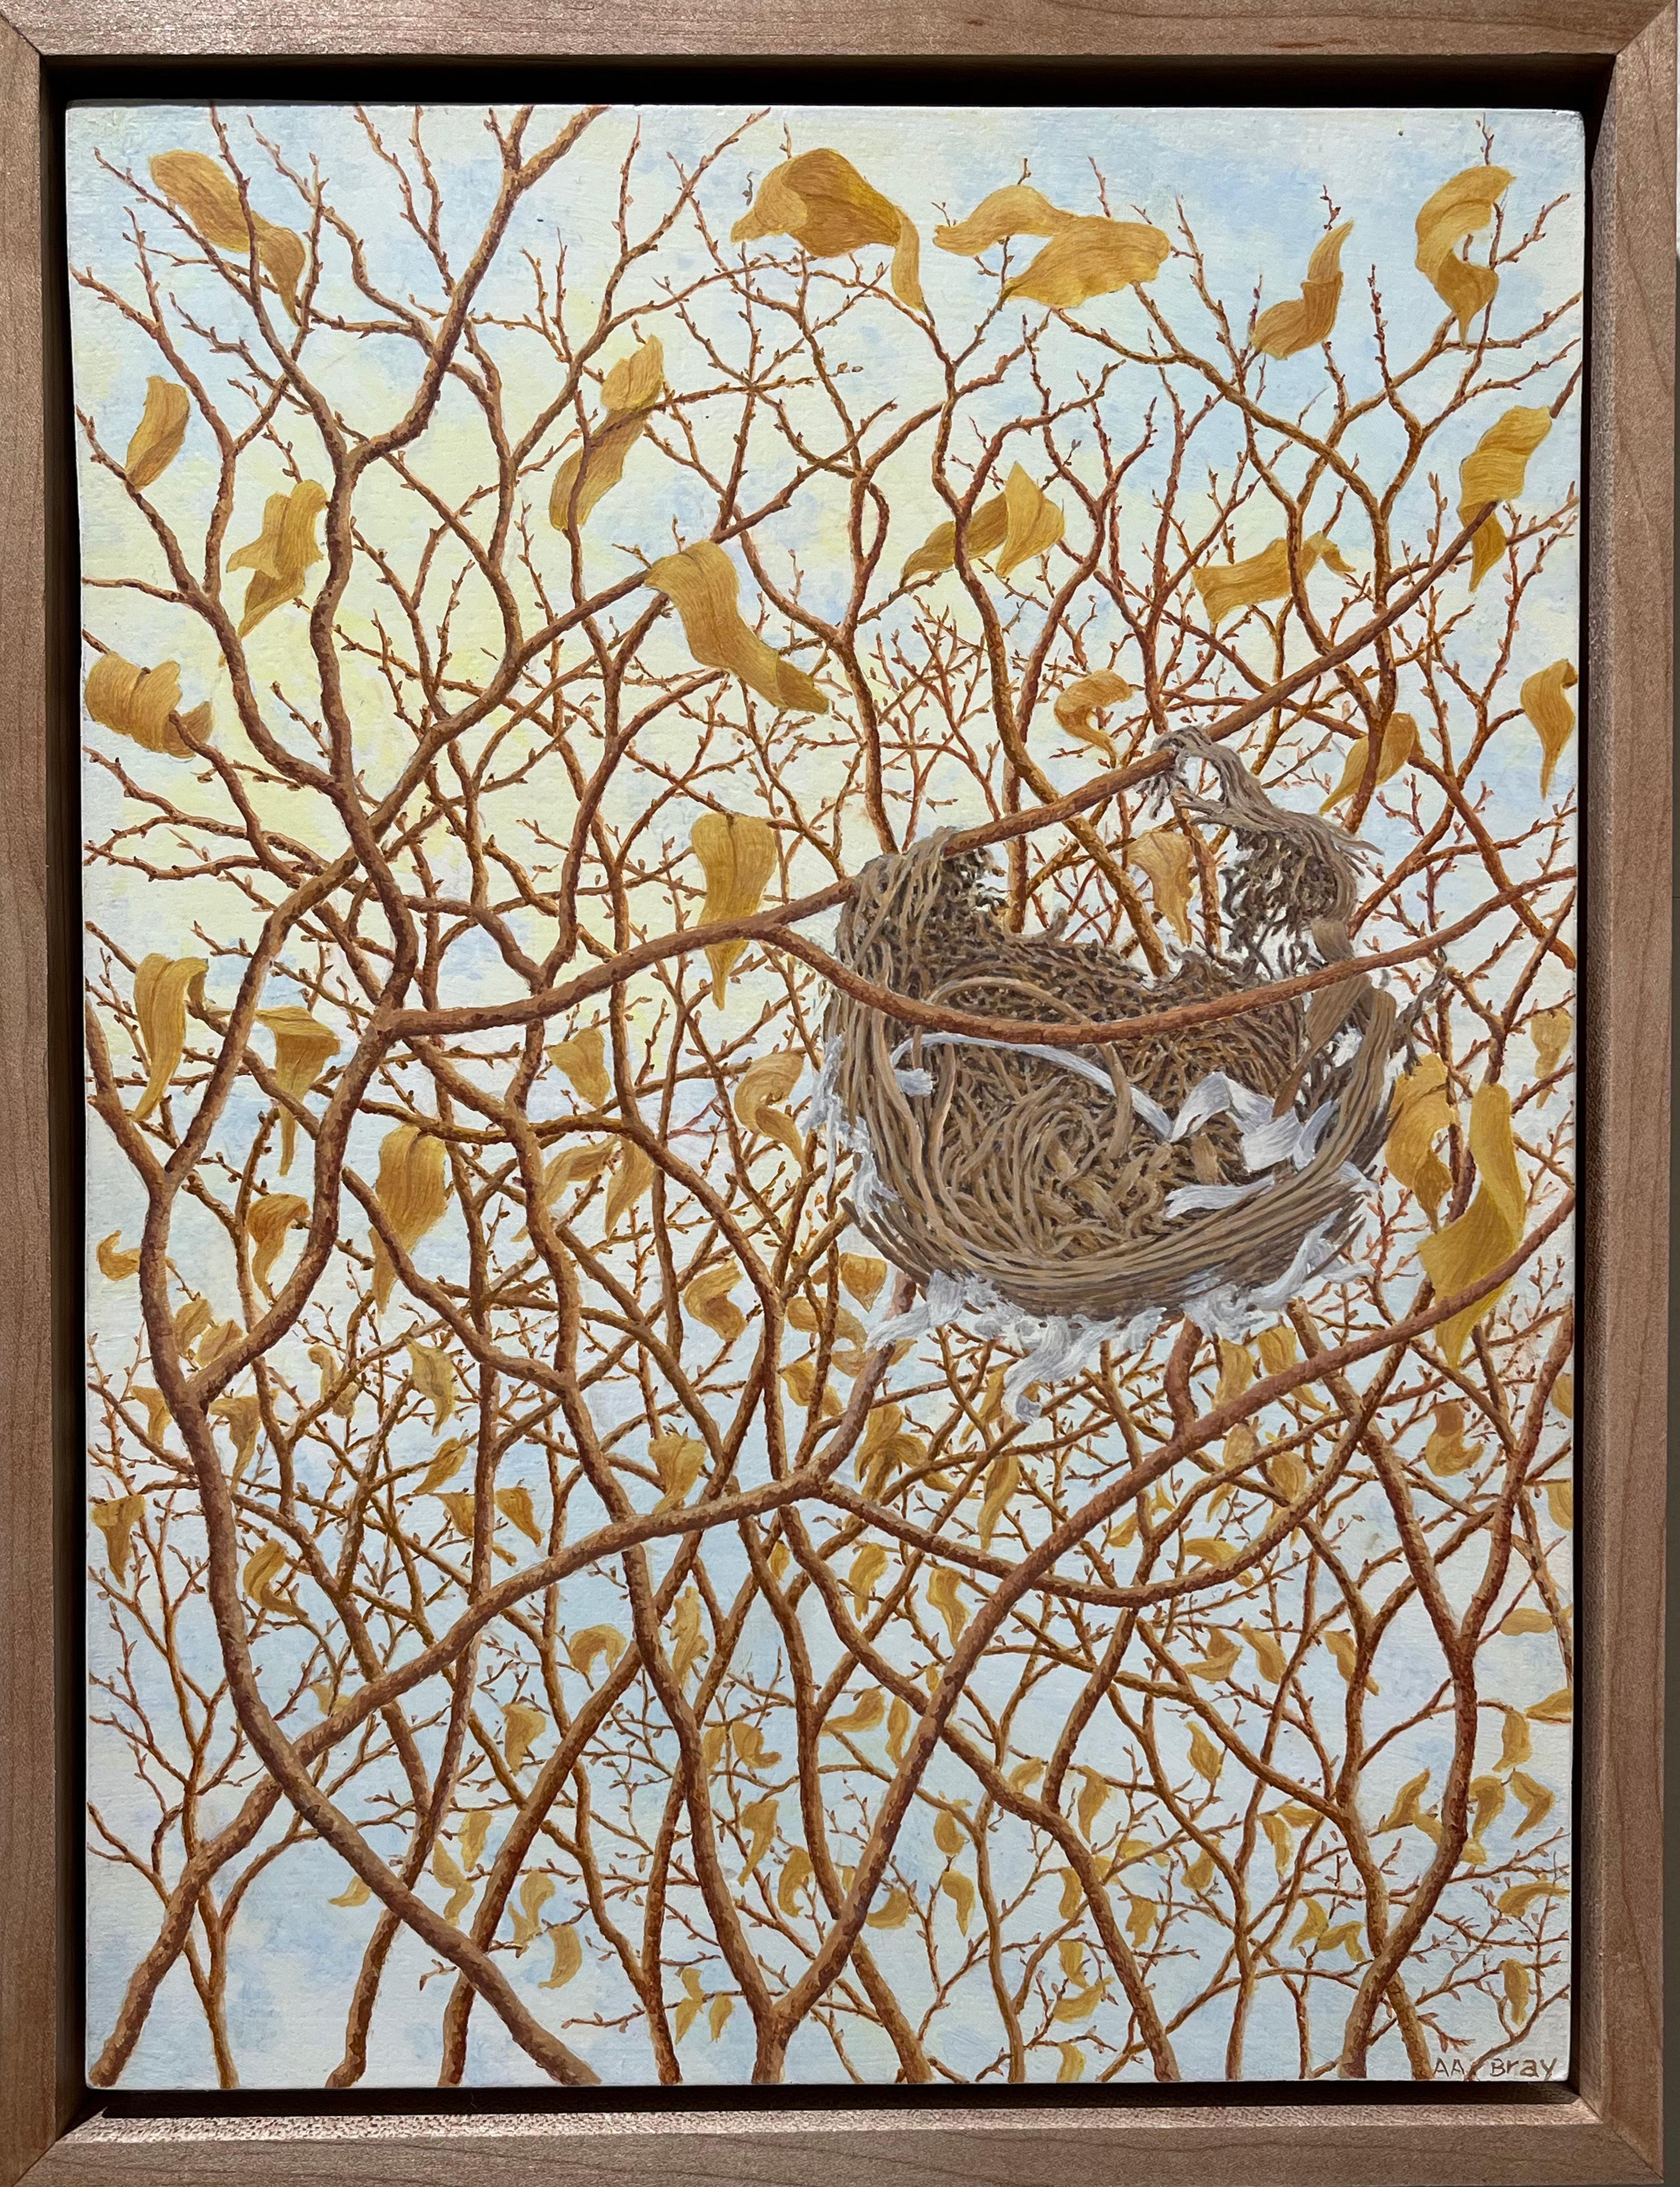 The latest painting from Alan Bray is a rare and exotic sighting, indeed. He’s shifted his focus away from the human realm and up to the skies, capturing an empty bird’s nest camouflaged amongst branches and broken waves. Though not so clandestine